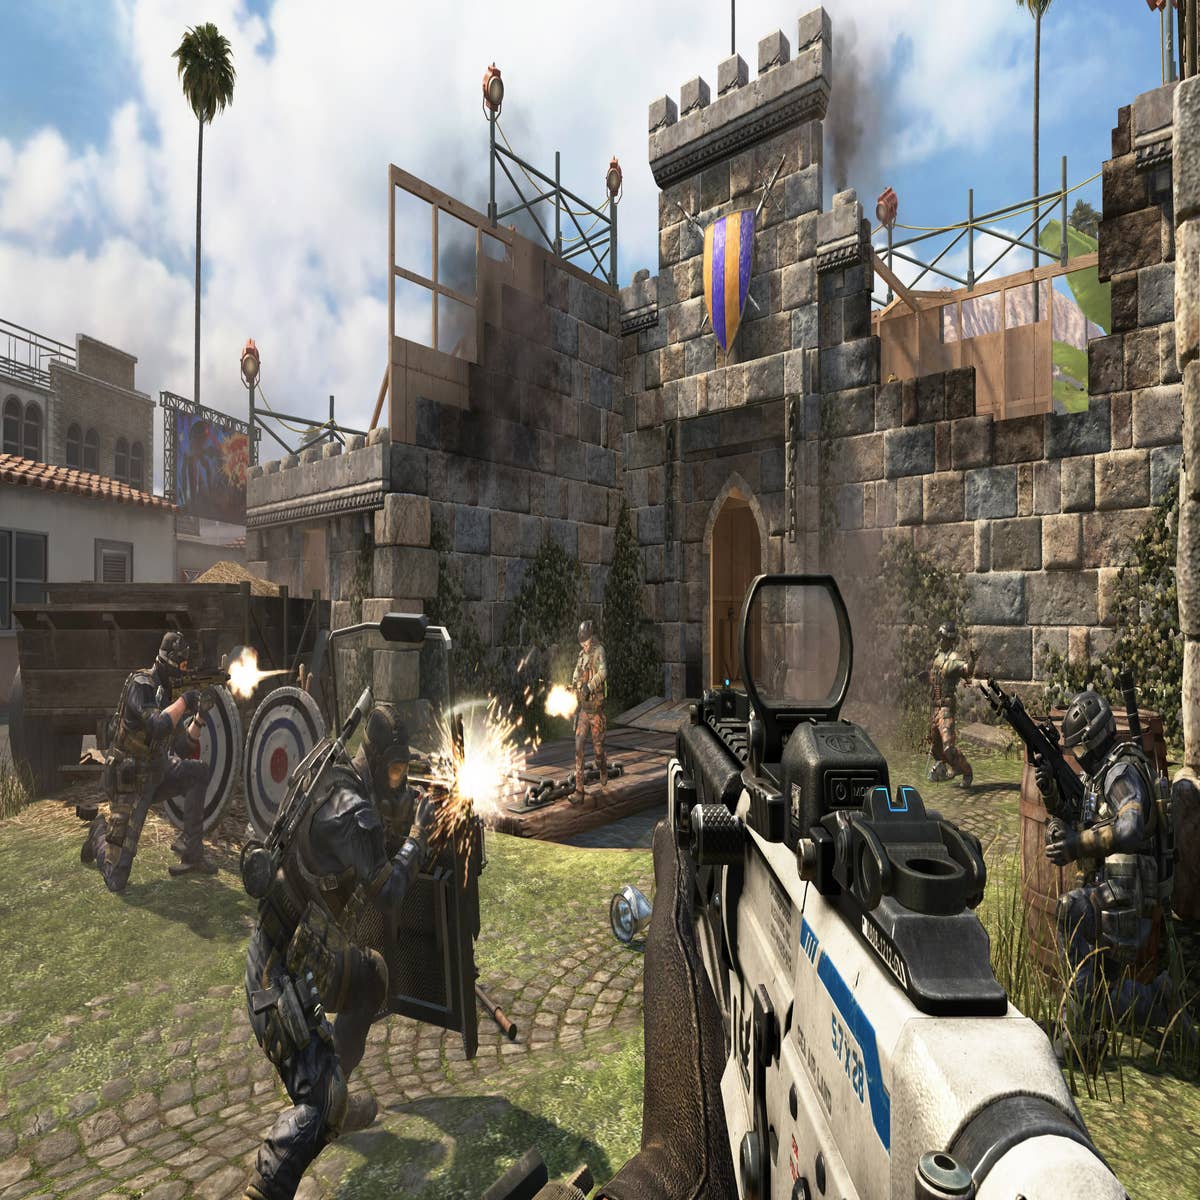 Black Ops 2: Zombies Map Reviews